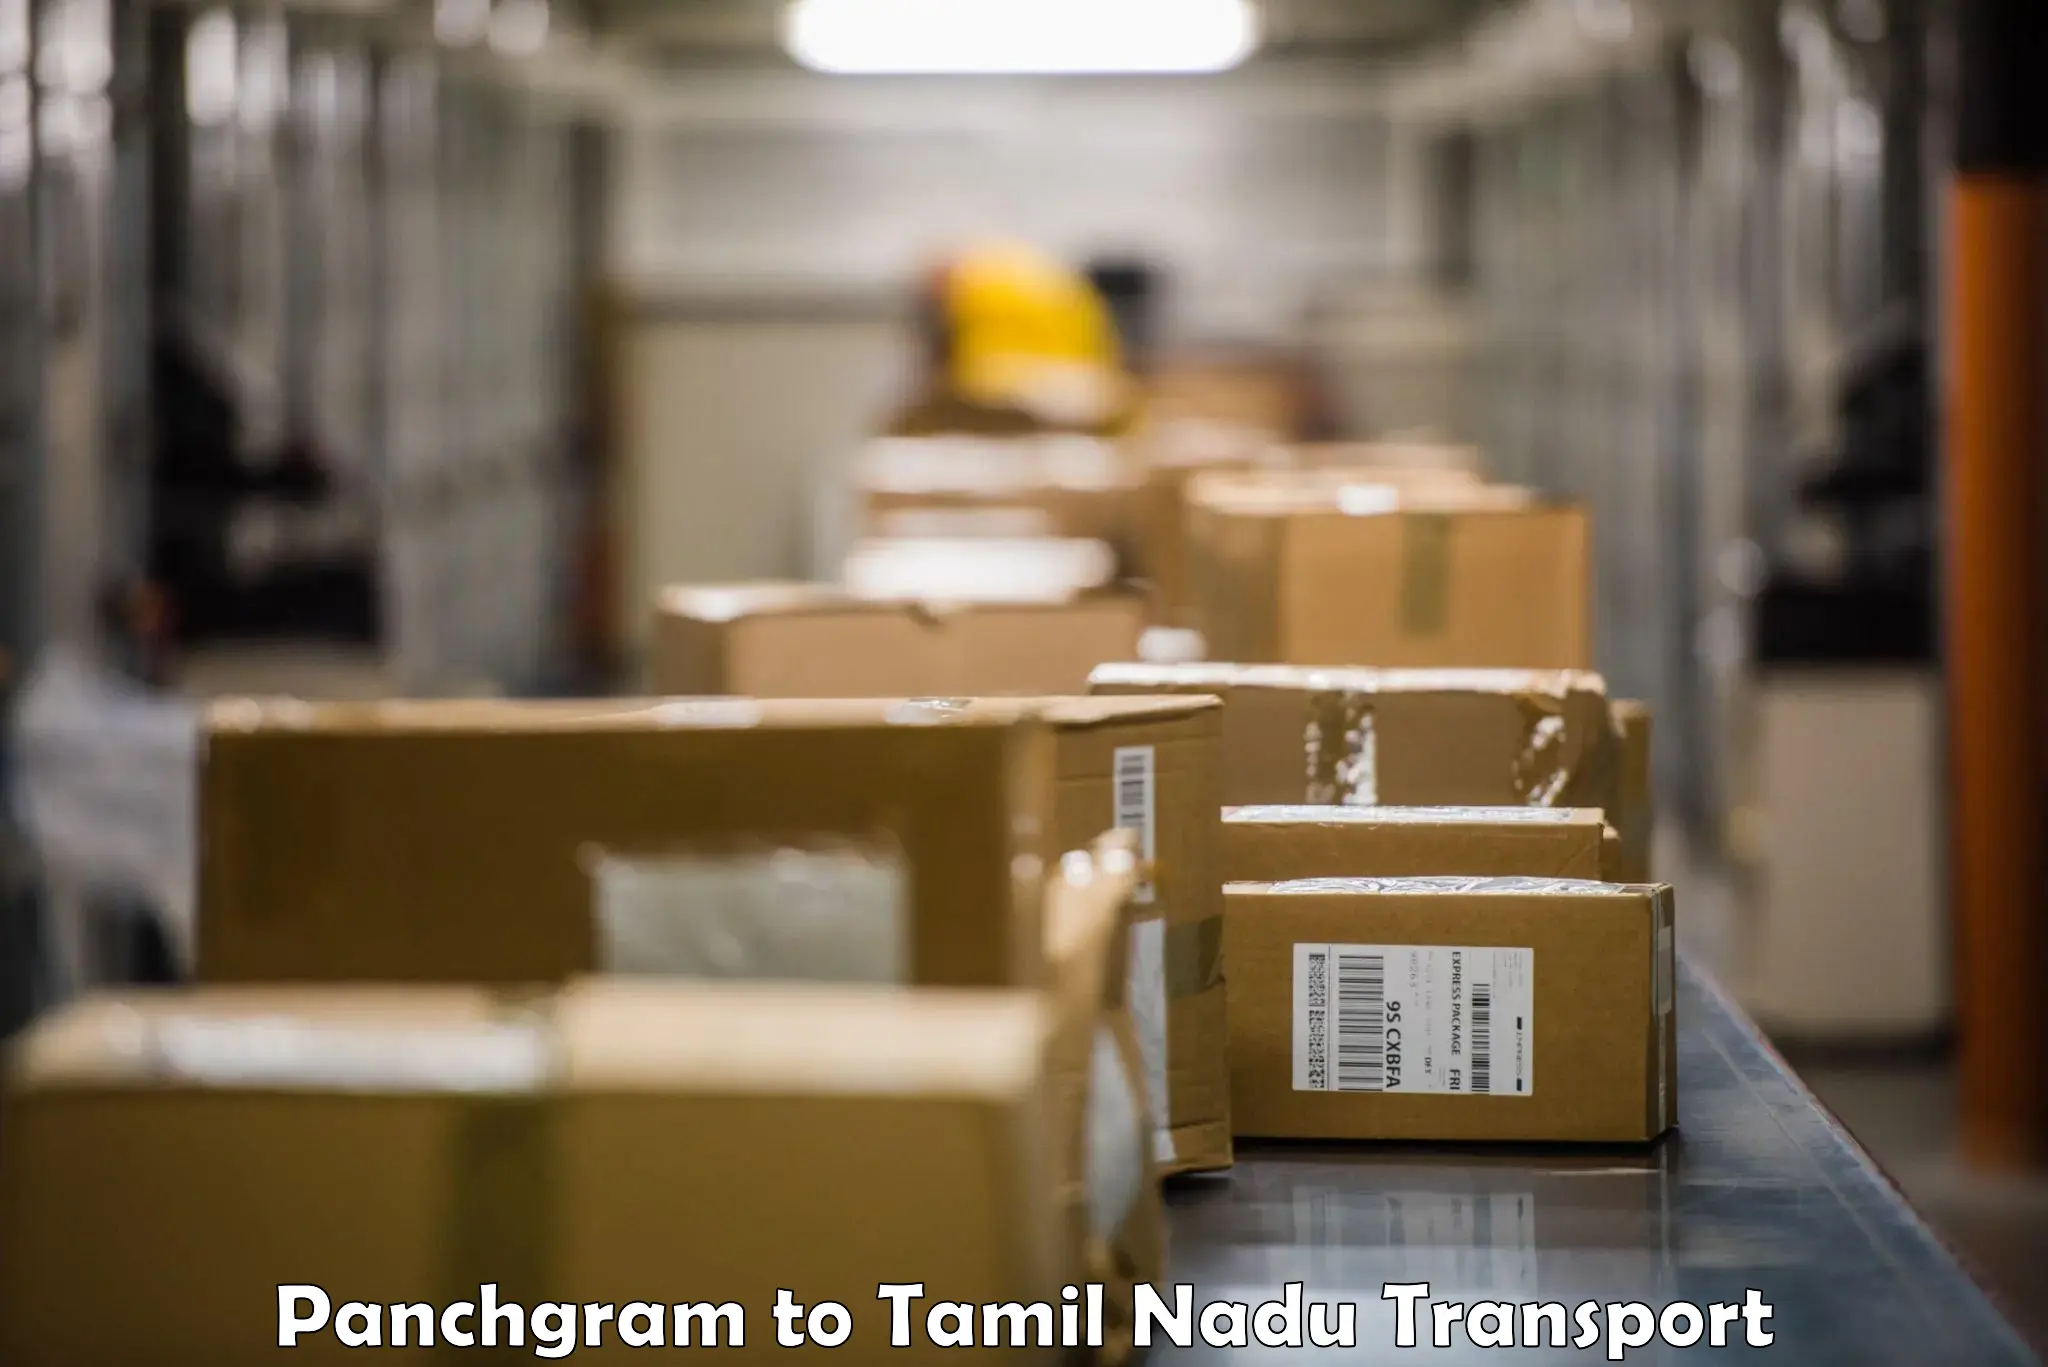 Pick up transport service in Panchgram to Thisayanvilai